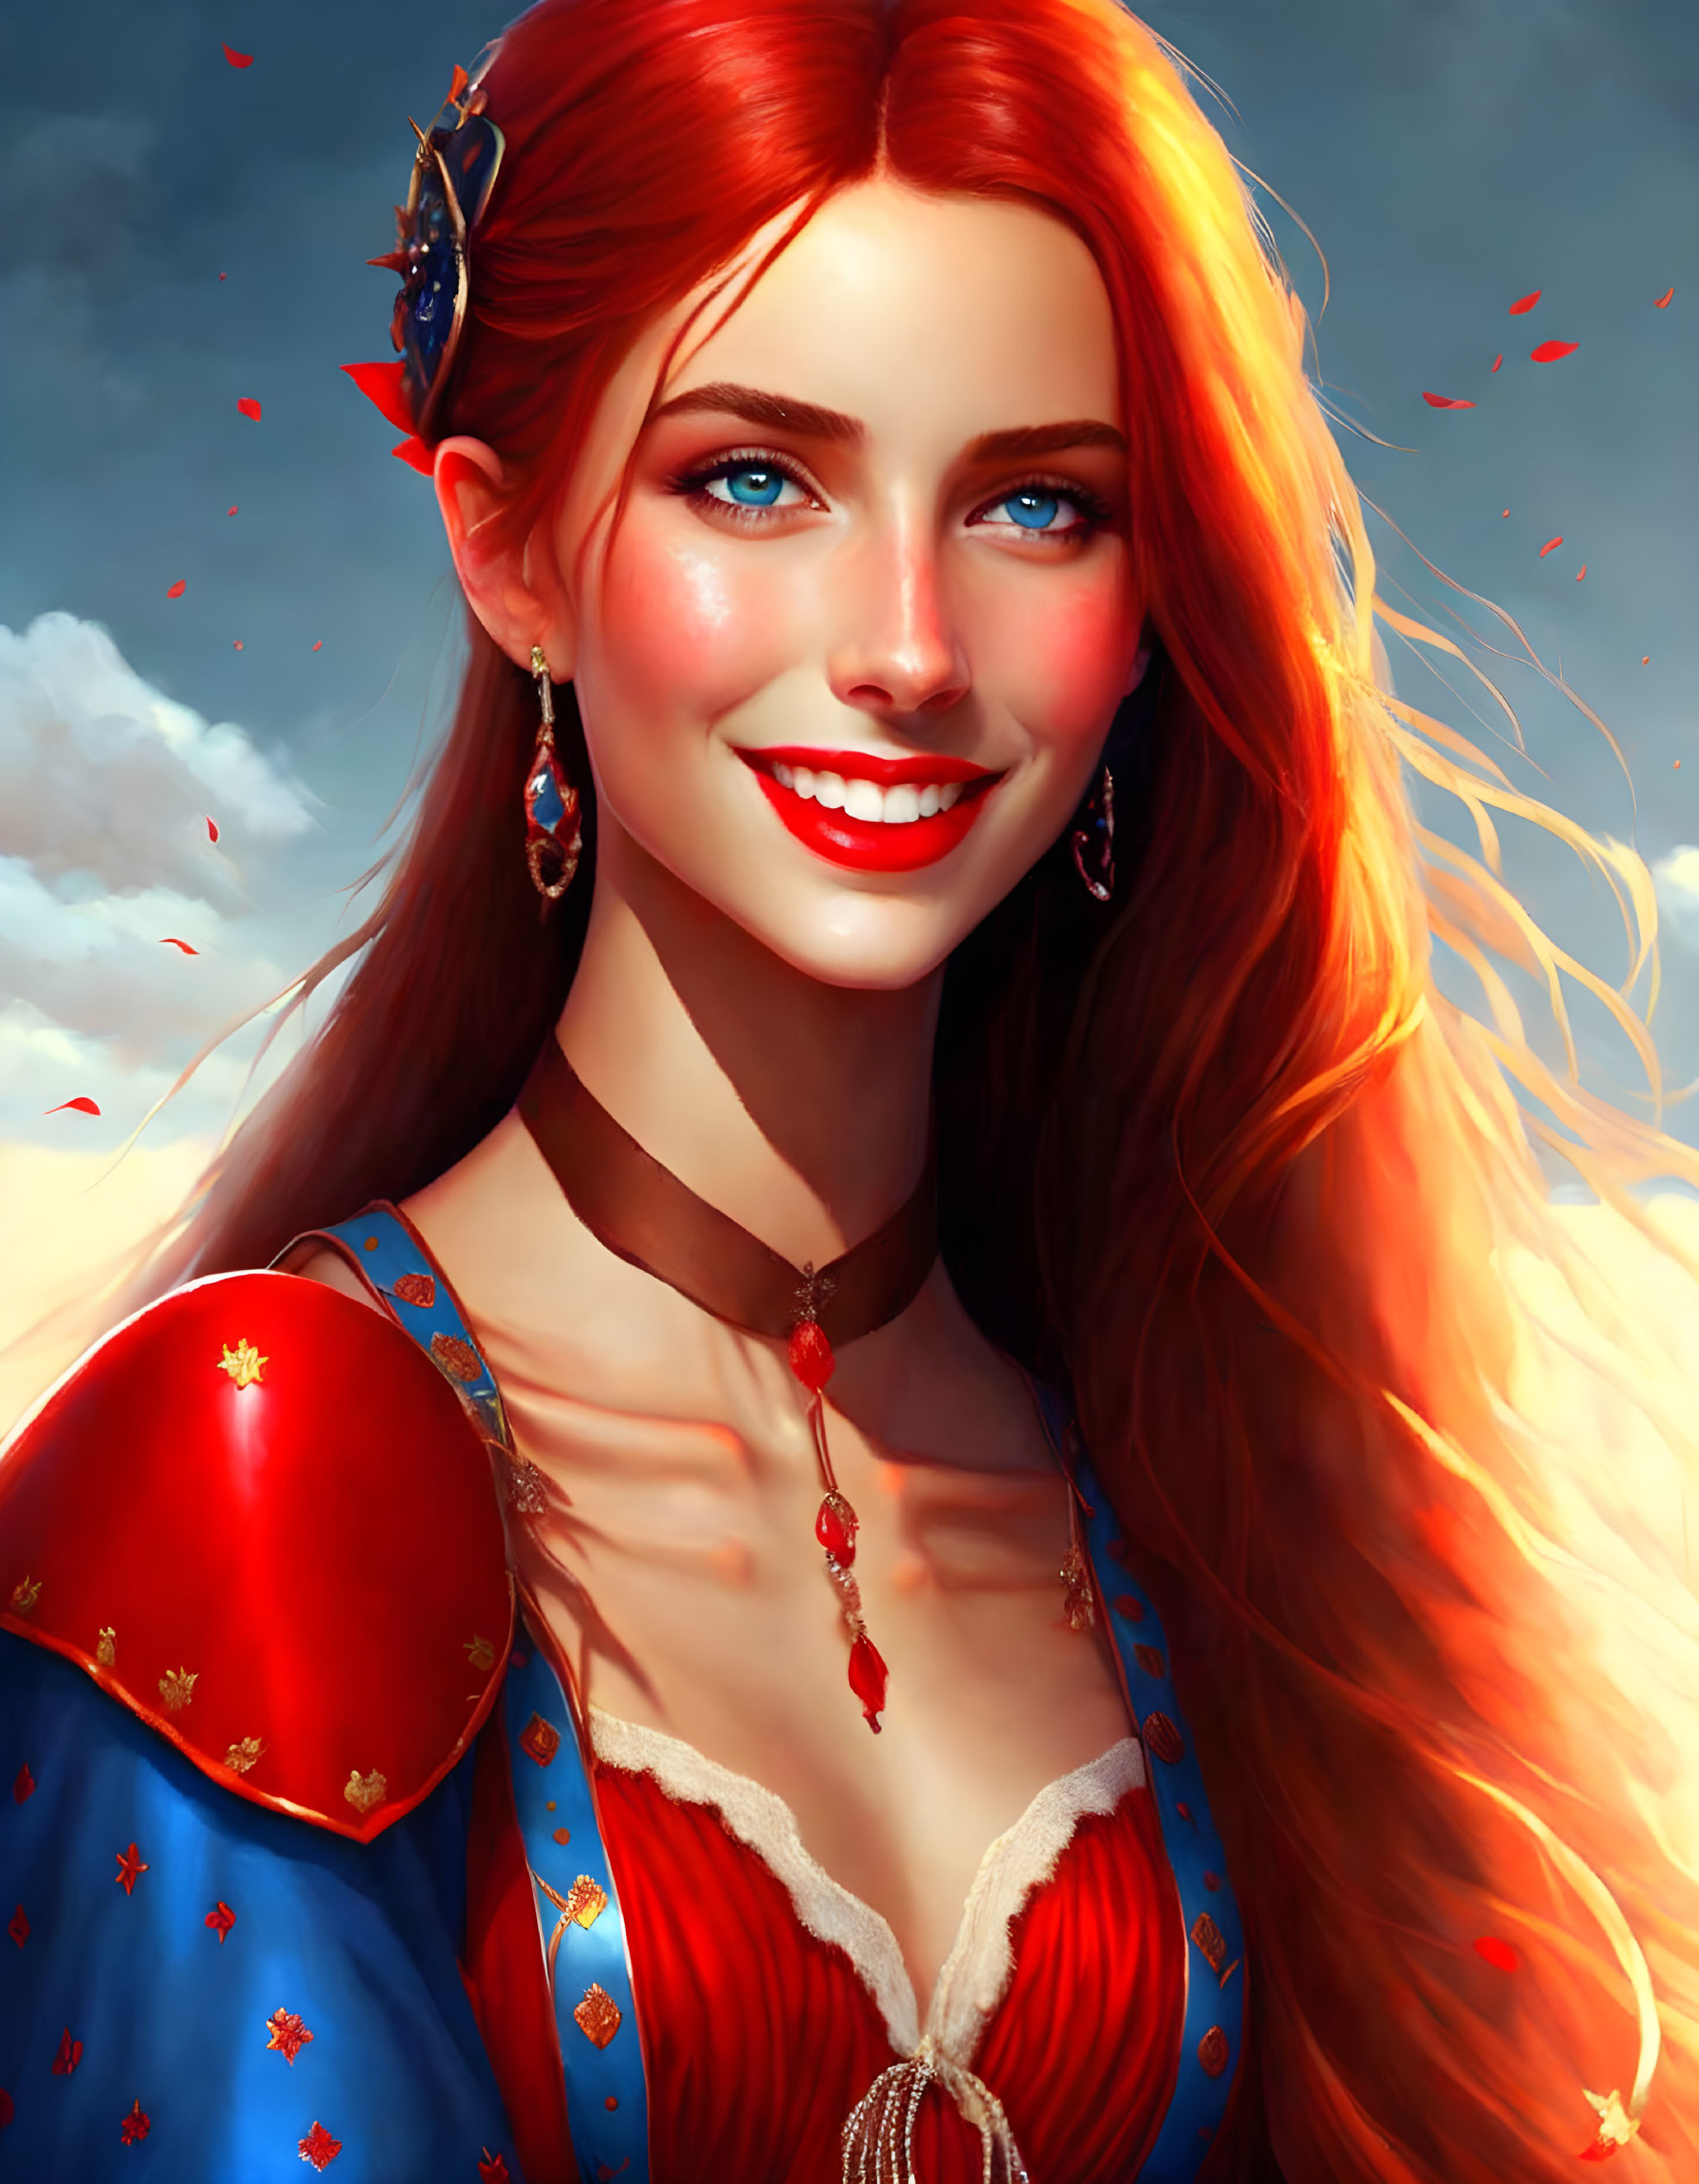 Red-haired woman in blue medieval attire with petal-like details